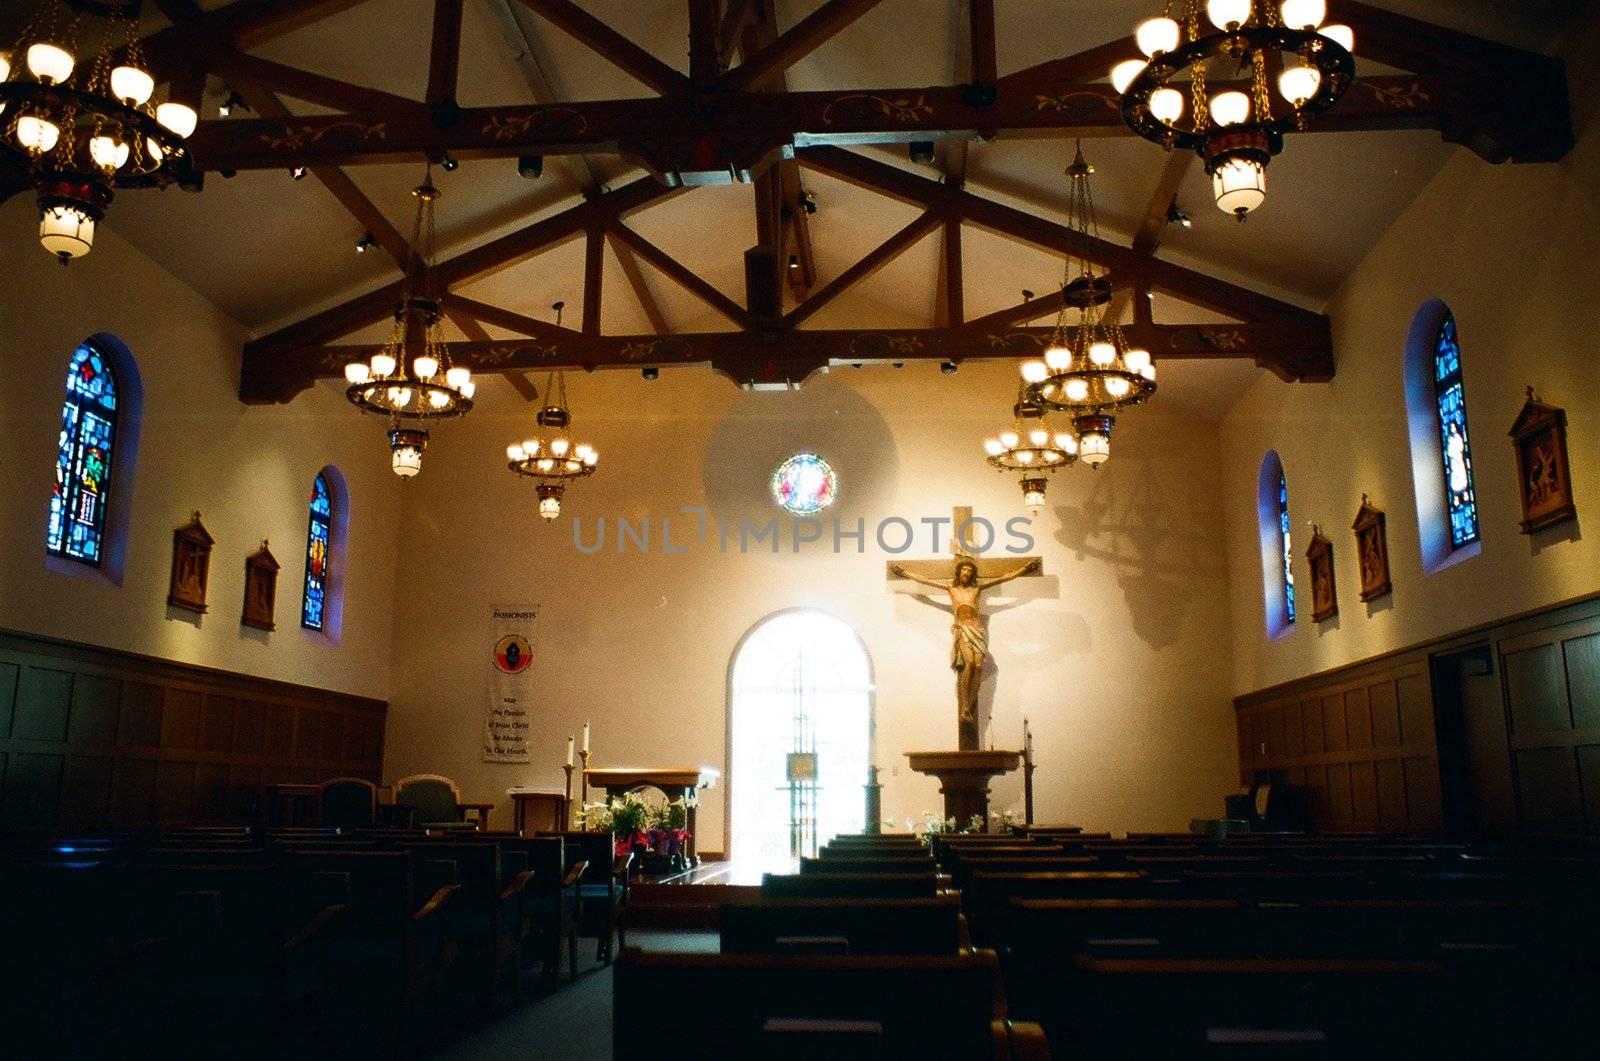 A photo of the inside of a Catholic church